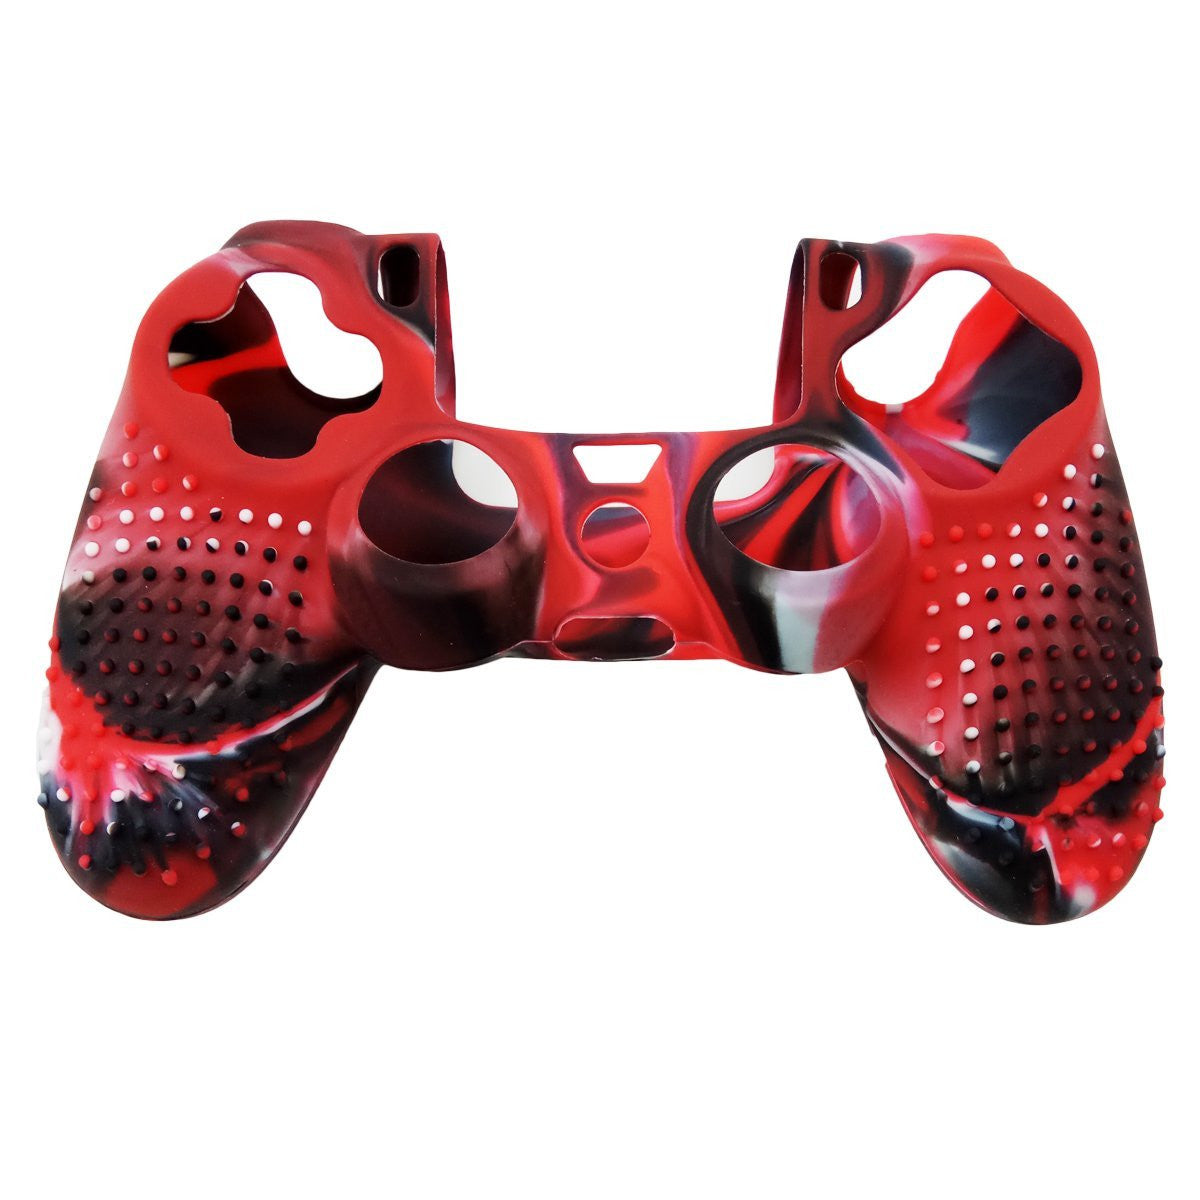 Anti-slip Silicone Protector Skin Case w/Thumb Grips for PS4/Slim/Pro Controller, Red